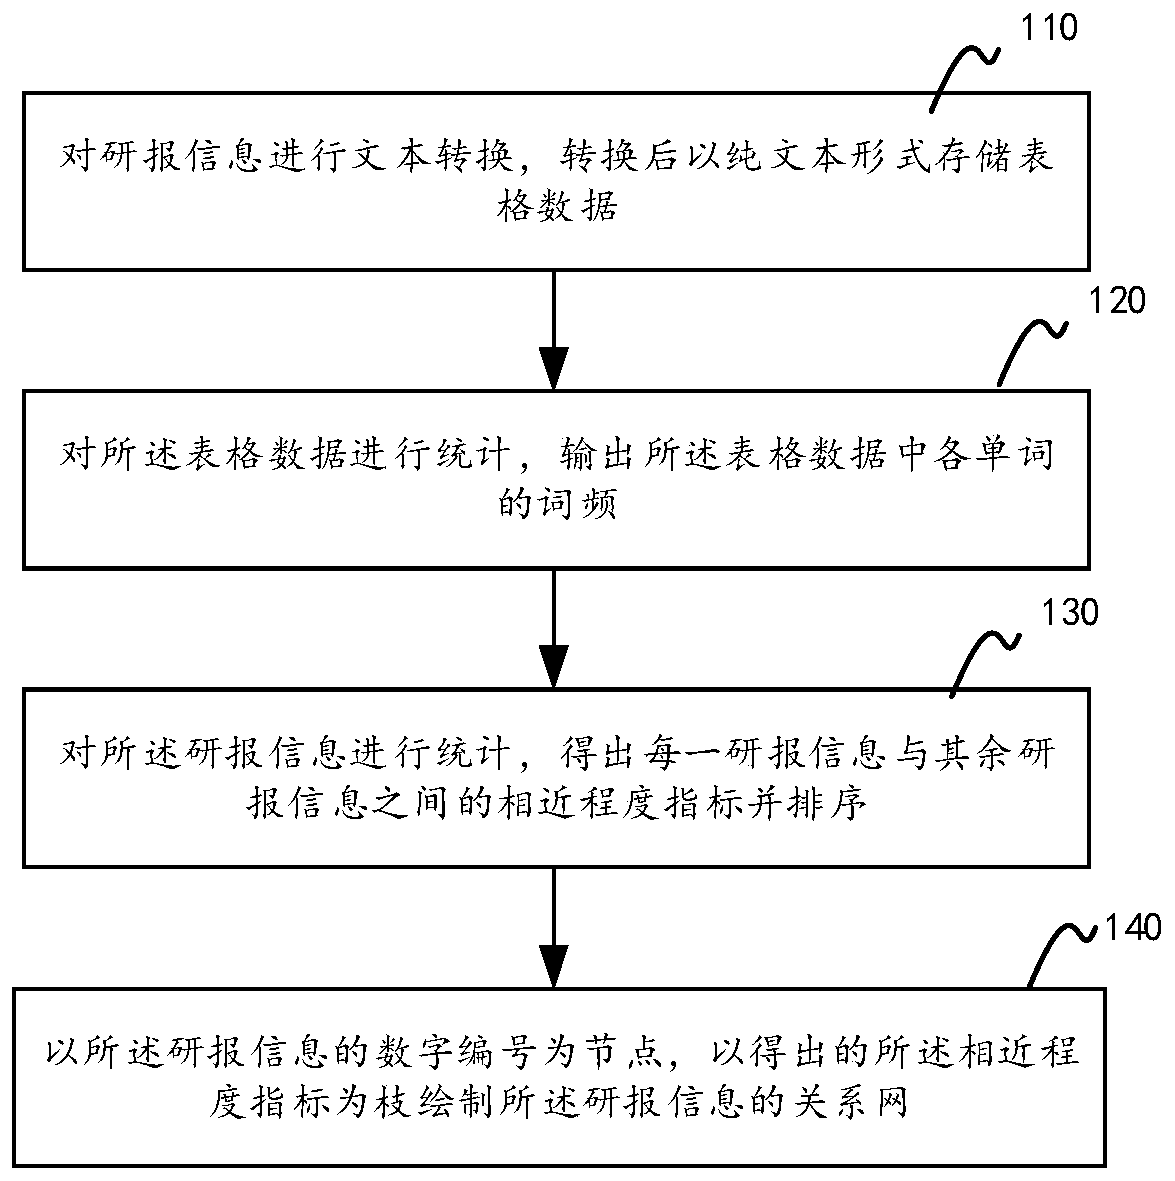 Large sample research report information extraction method and apparatus, device, and storage medium